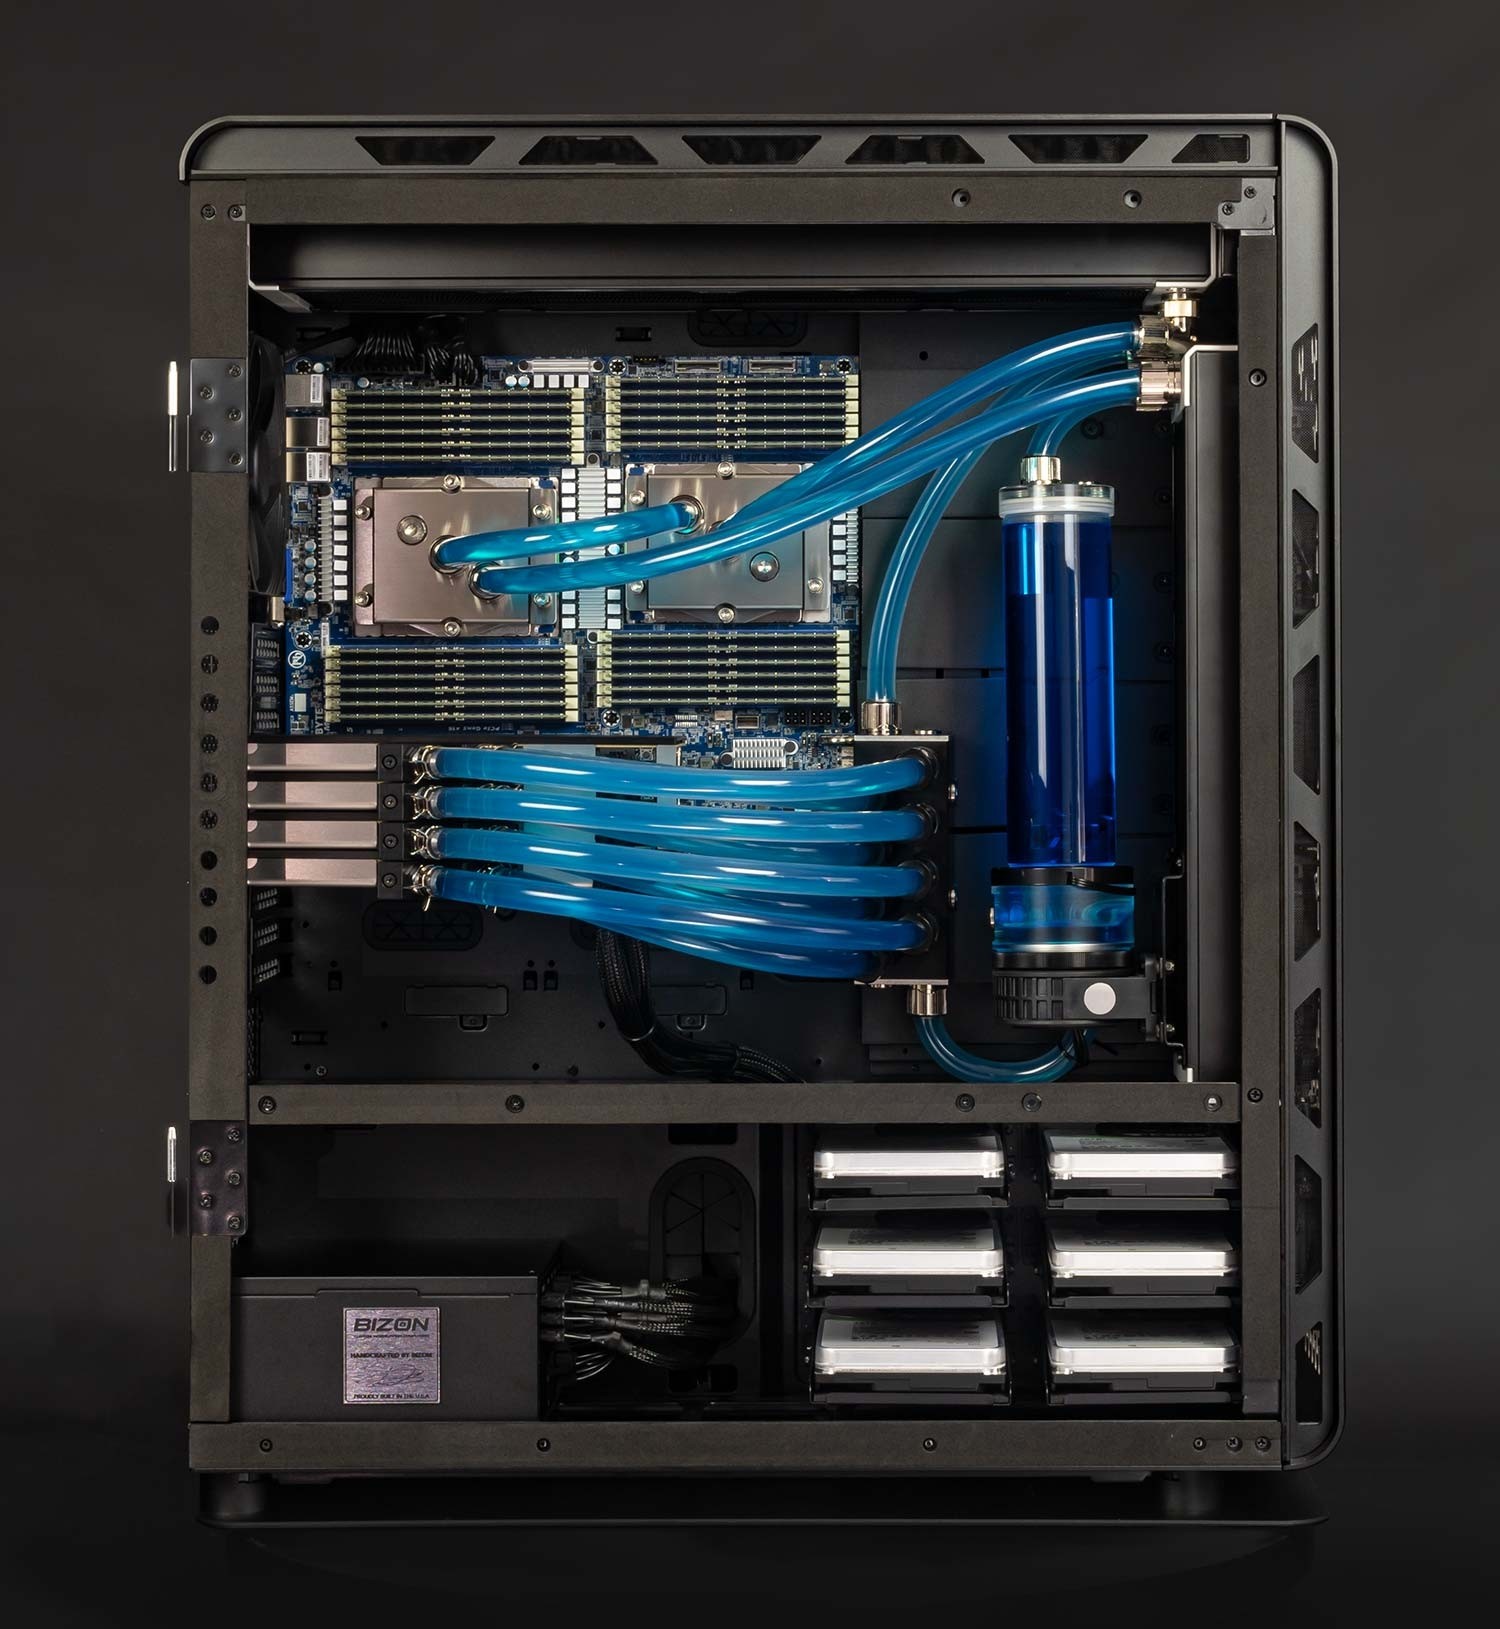 BIZON ZX6000 G2 – Water-cooled Dual AMD EPYC 7003, 9004 Workstation –  Scientific Research an Rendering PC – Up to 4 GPU, Up to 256 Cores CPU